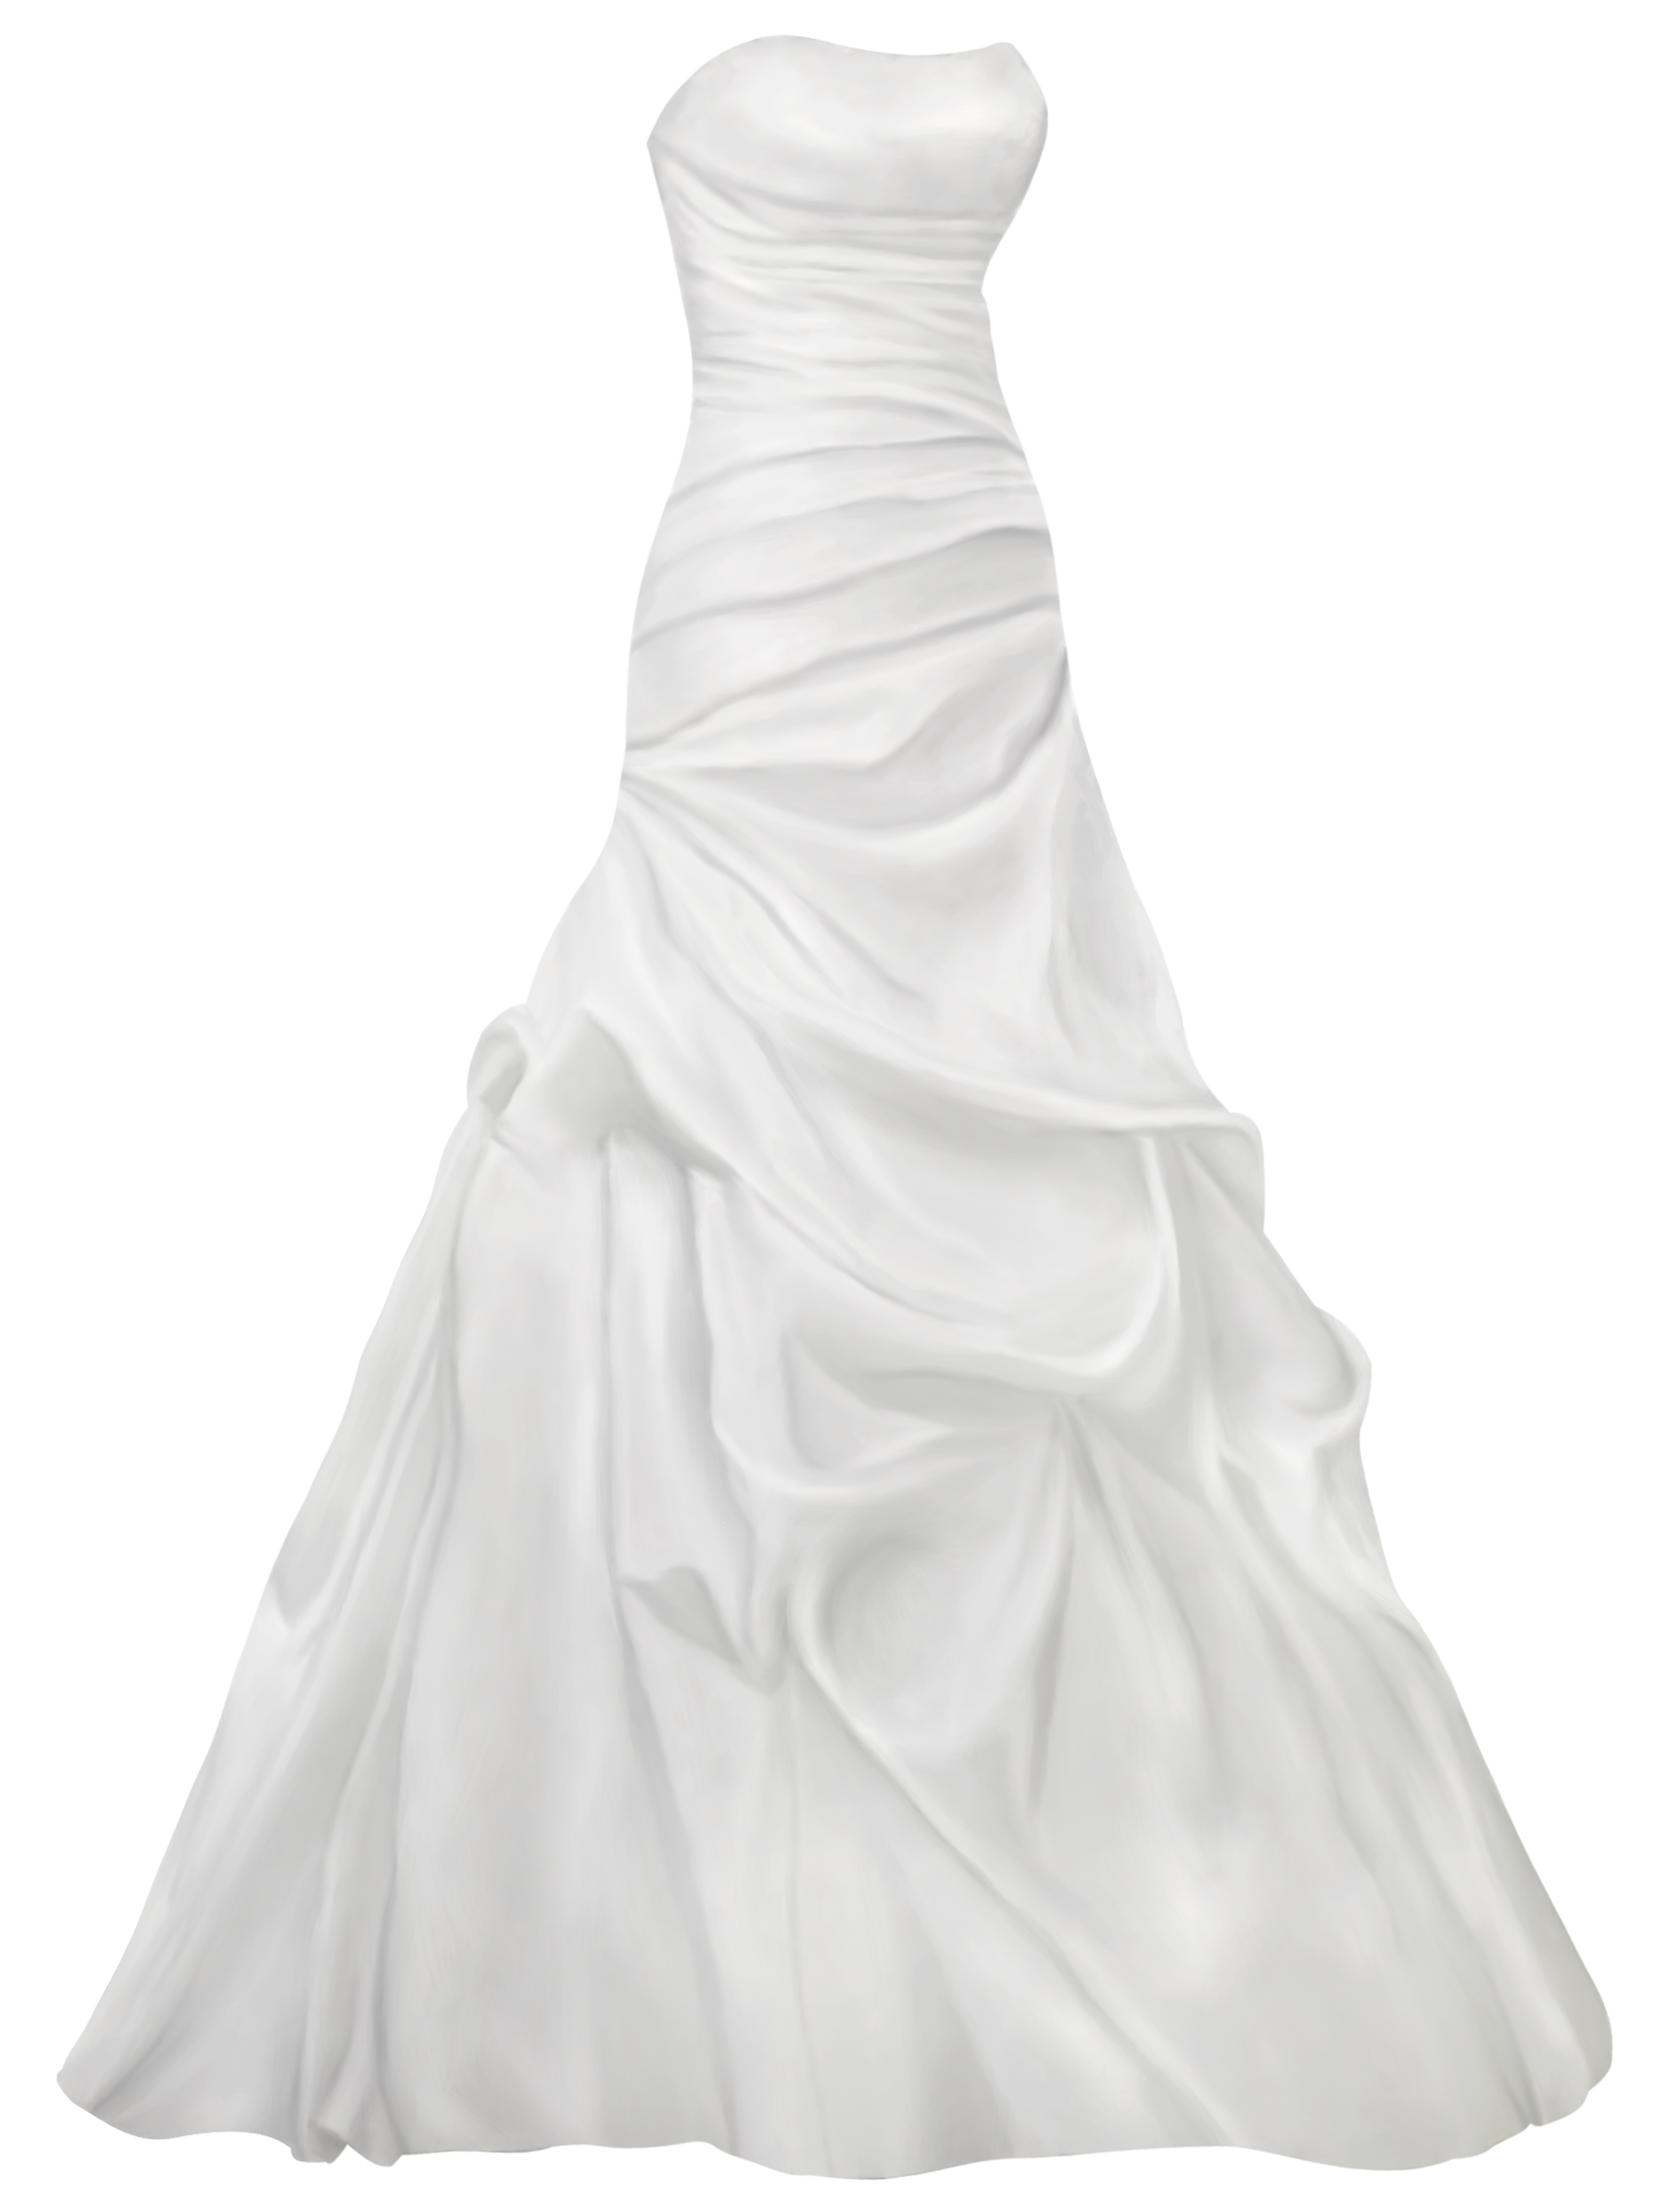 free wedding gown clipart - photo #47